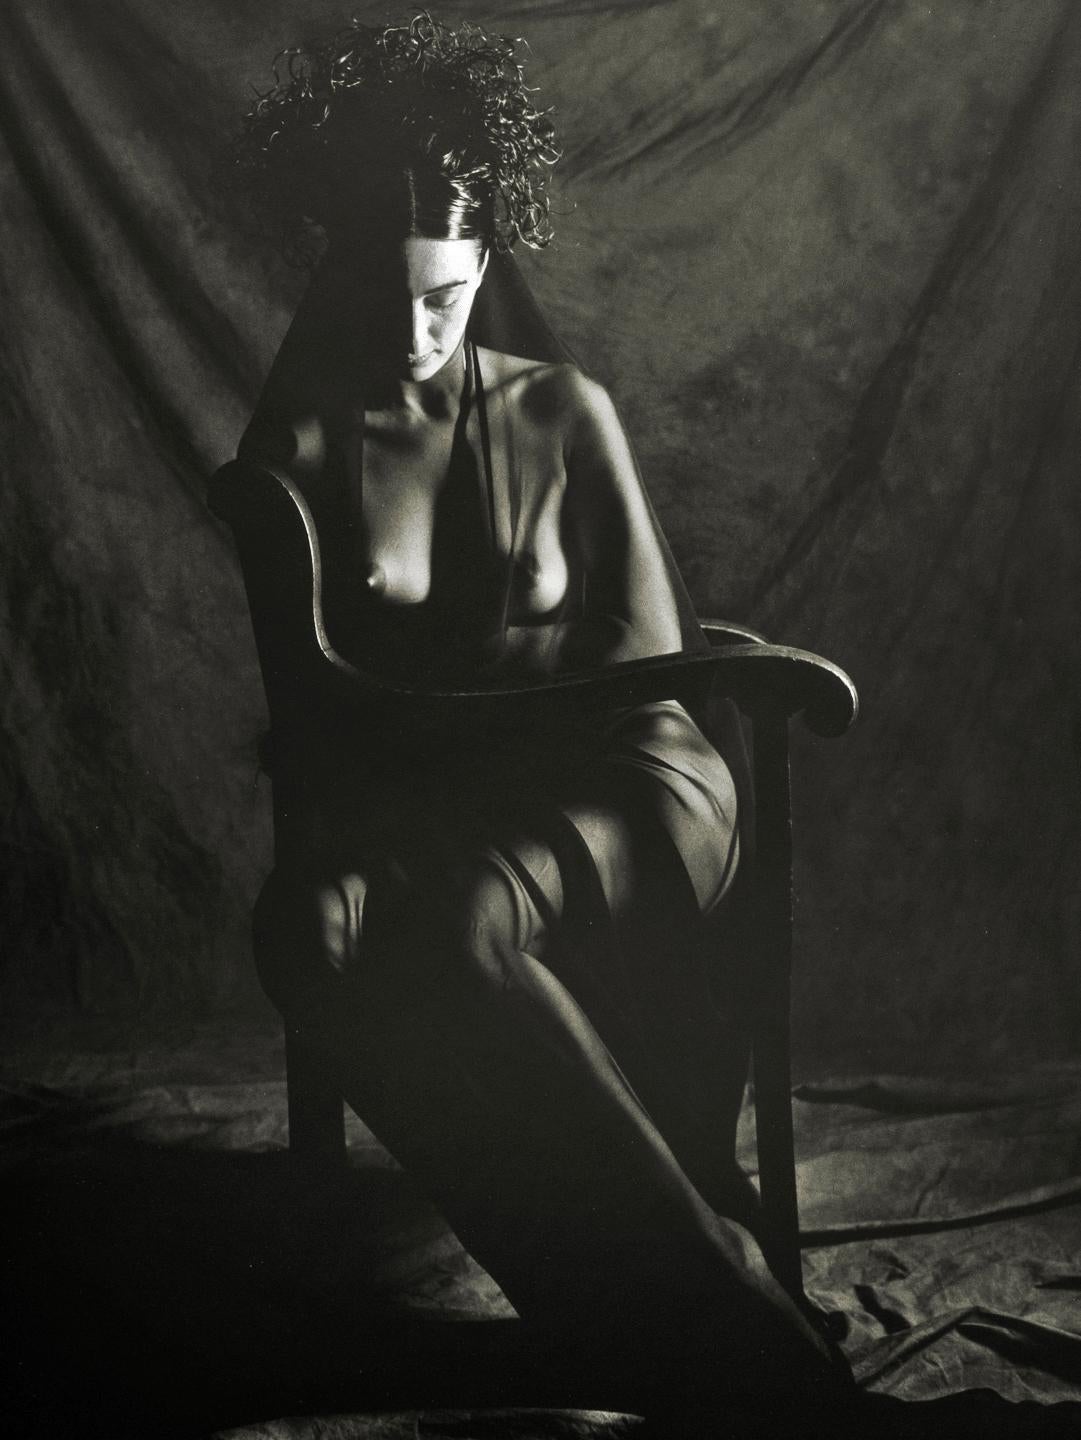 A quiet solitude is evident in Doug Birkenheuer's photograph entitled "Somber Woman".  Her nakedness is veiled in a sheer black cloth, her eyes downcast.  The piece is framed in a heavy black frame measuring 11h x 9.5w x 1.5d inches.

Doug